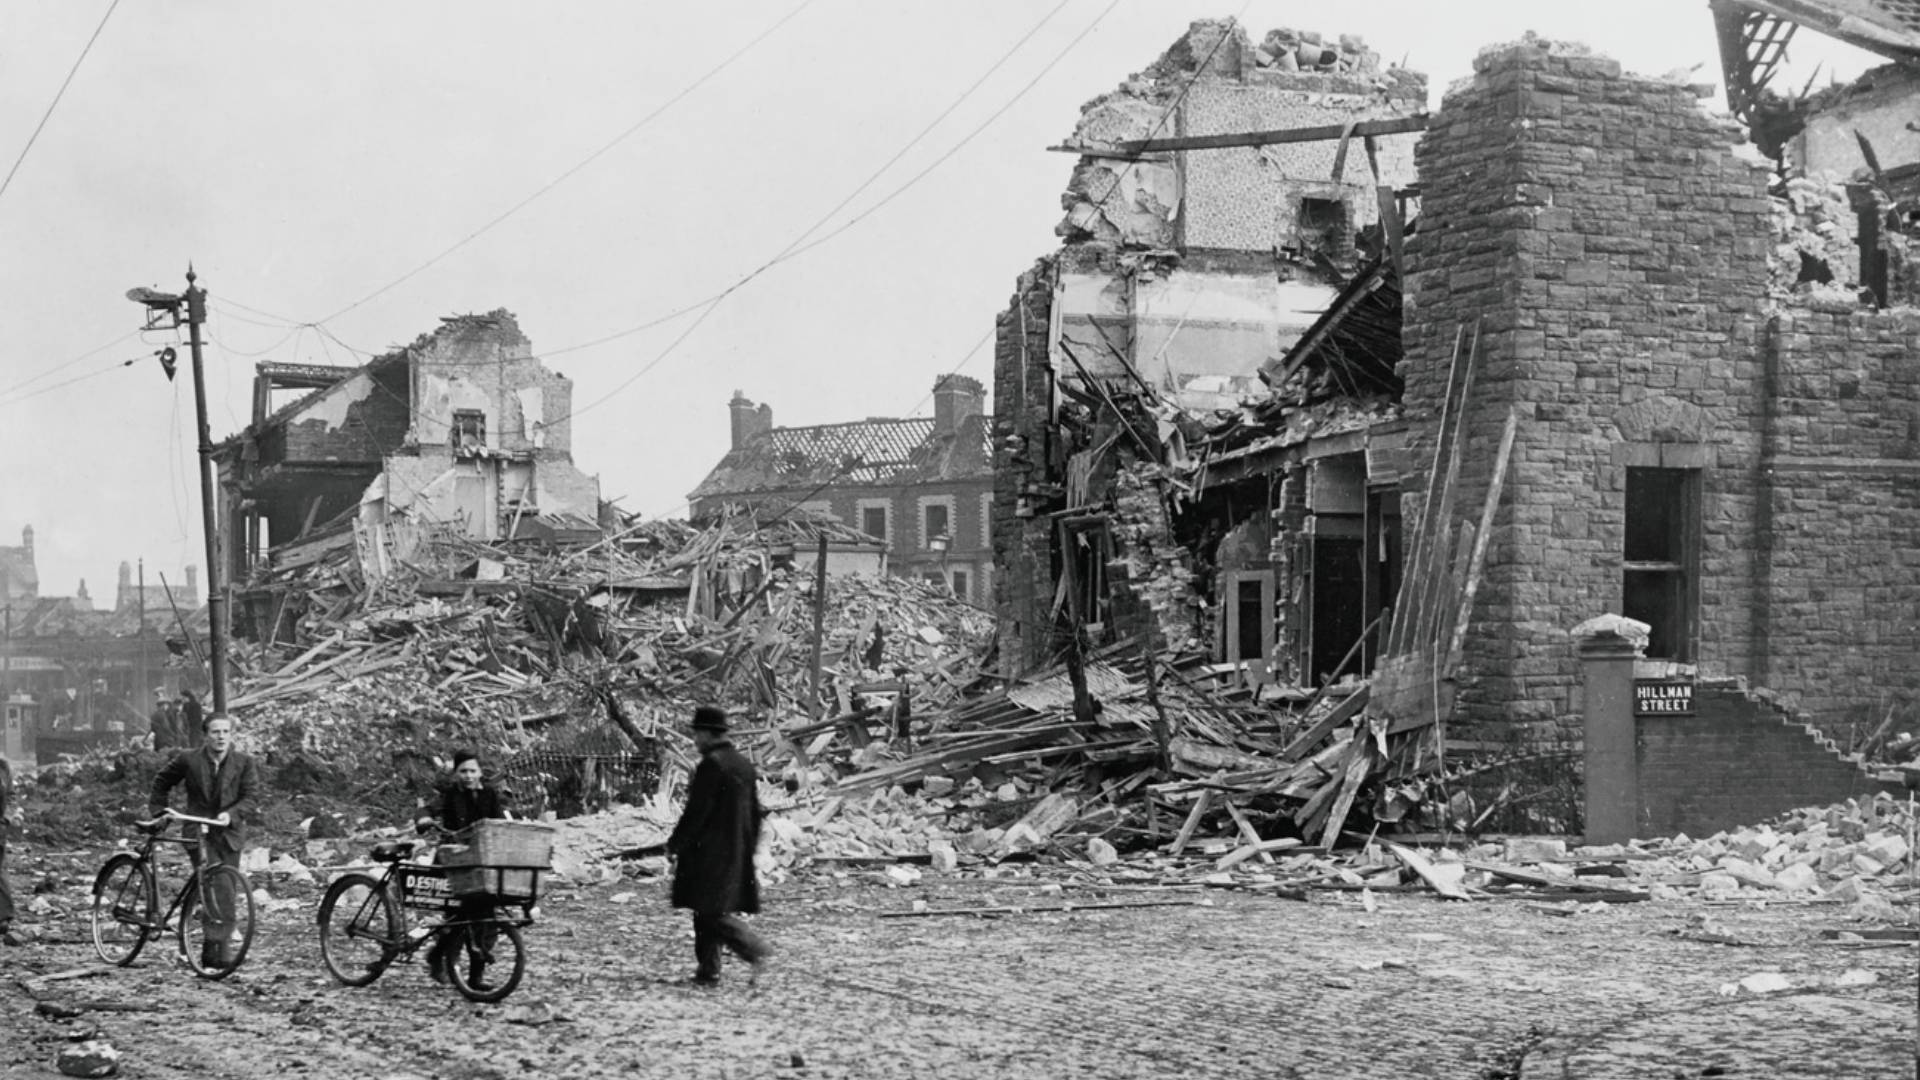 Local residents go about their day among the bomb damage at the junction of Hillman Street with Antrim Road, Belfast.